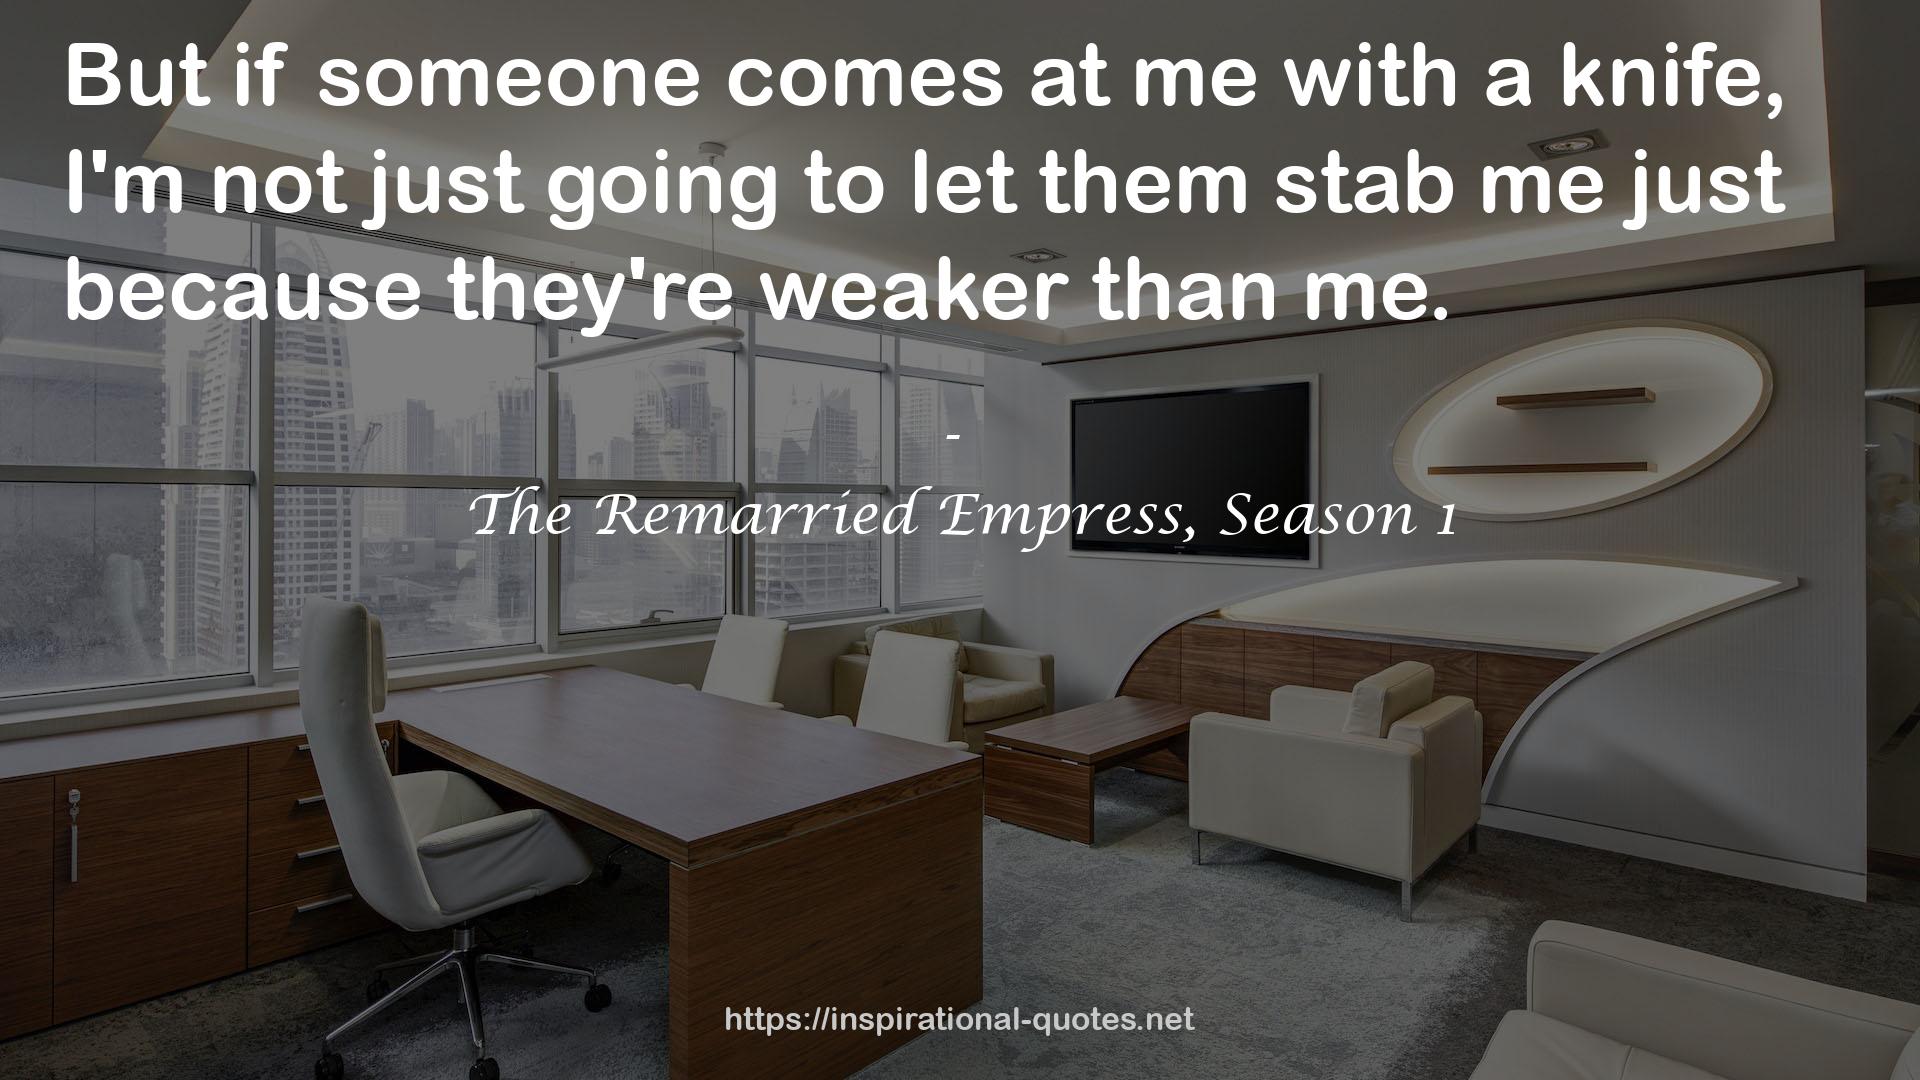 The Remarried Empress, Season 1 QUOTES